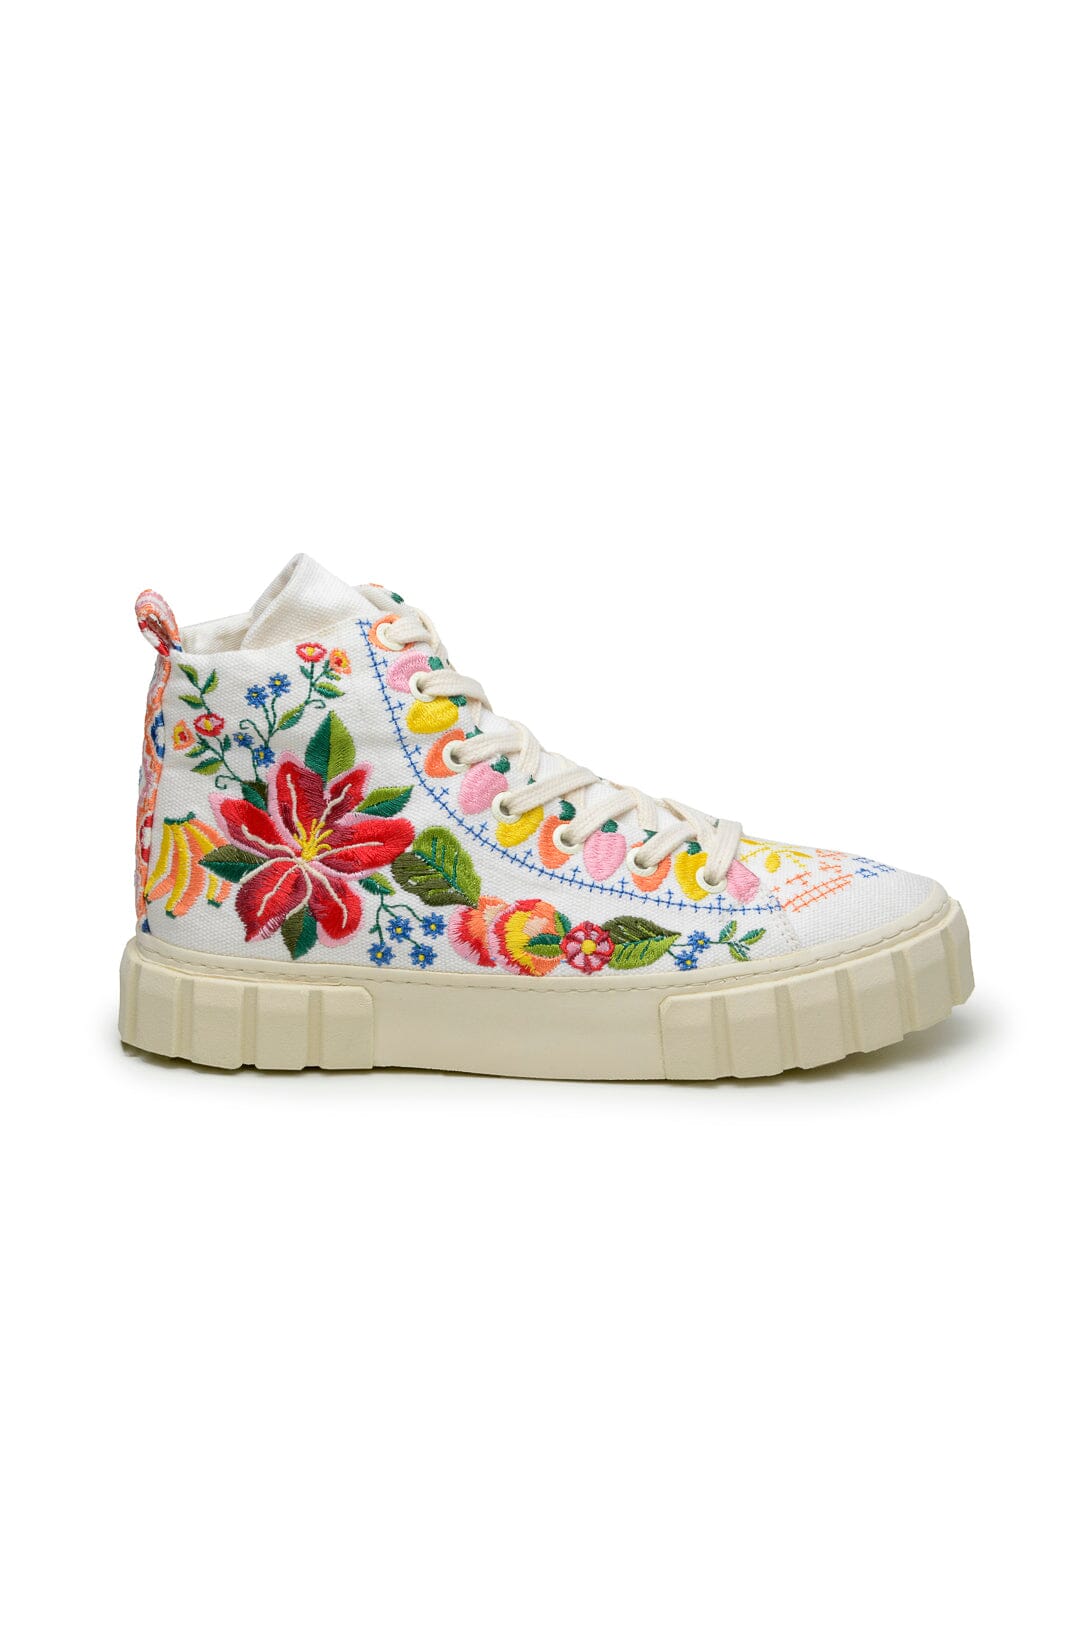 Off White Tropical Romance High Top Sneaker